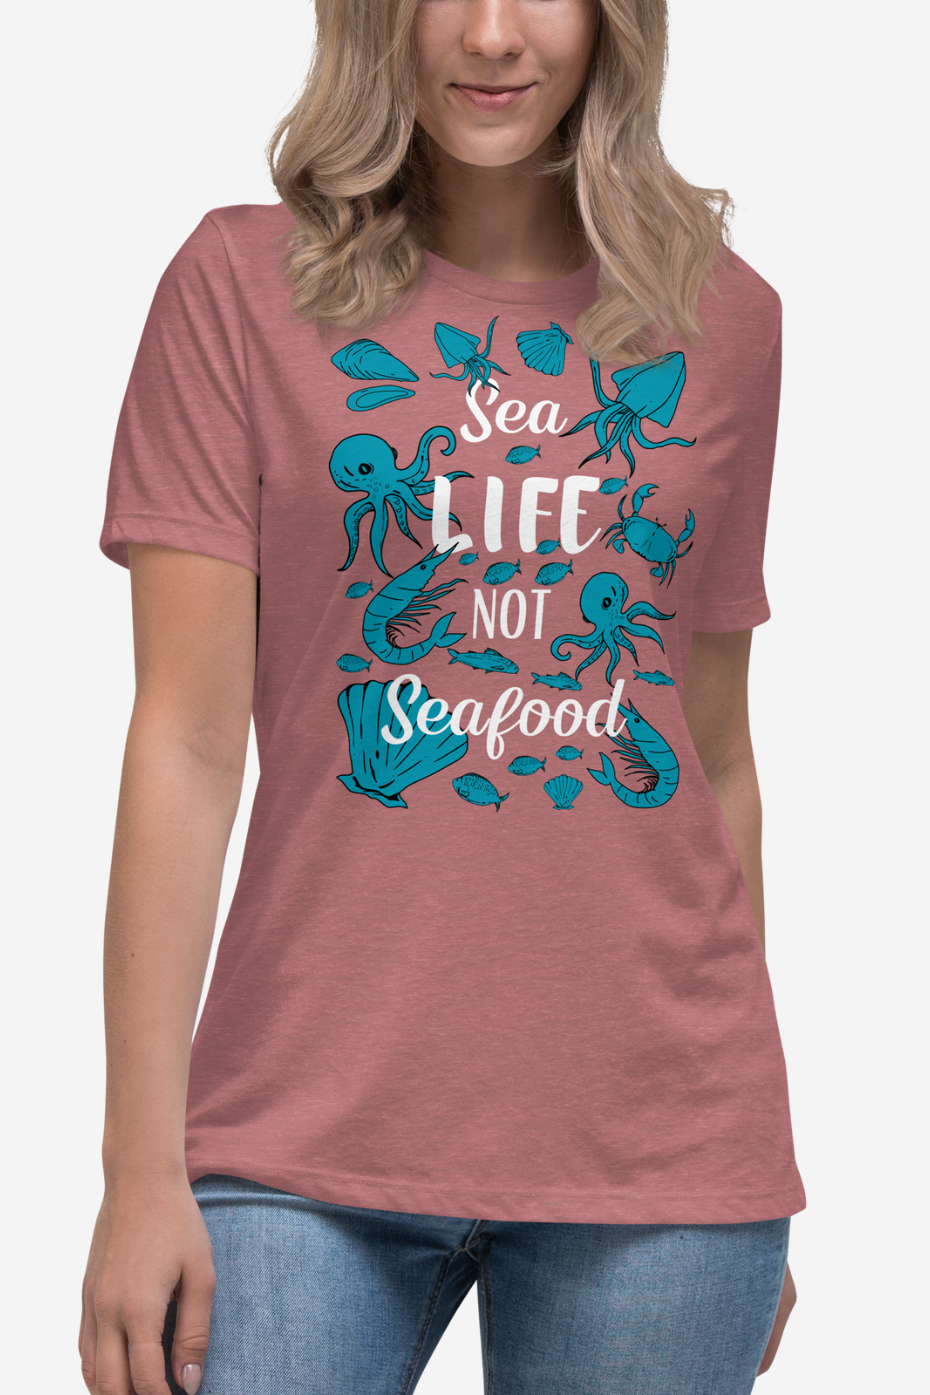 Sea Life Not Seafood Women's Relaxed T-Shirt